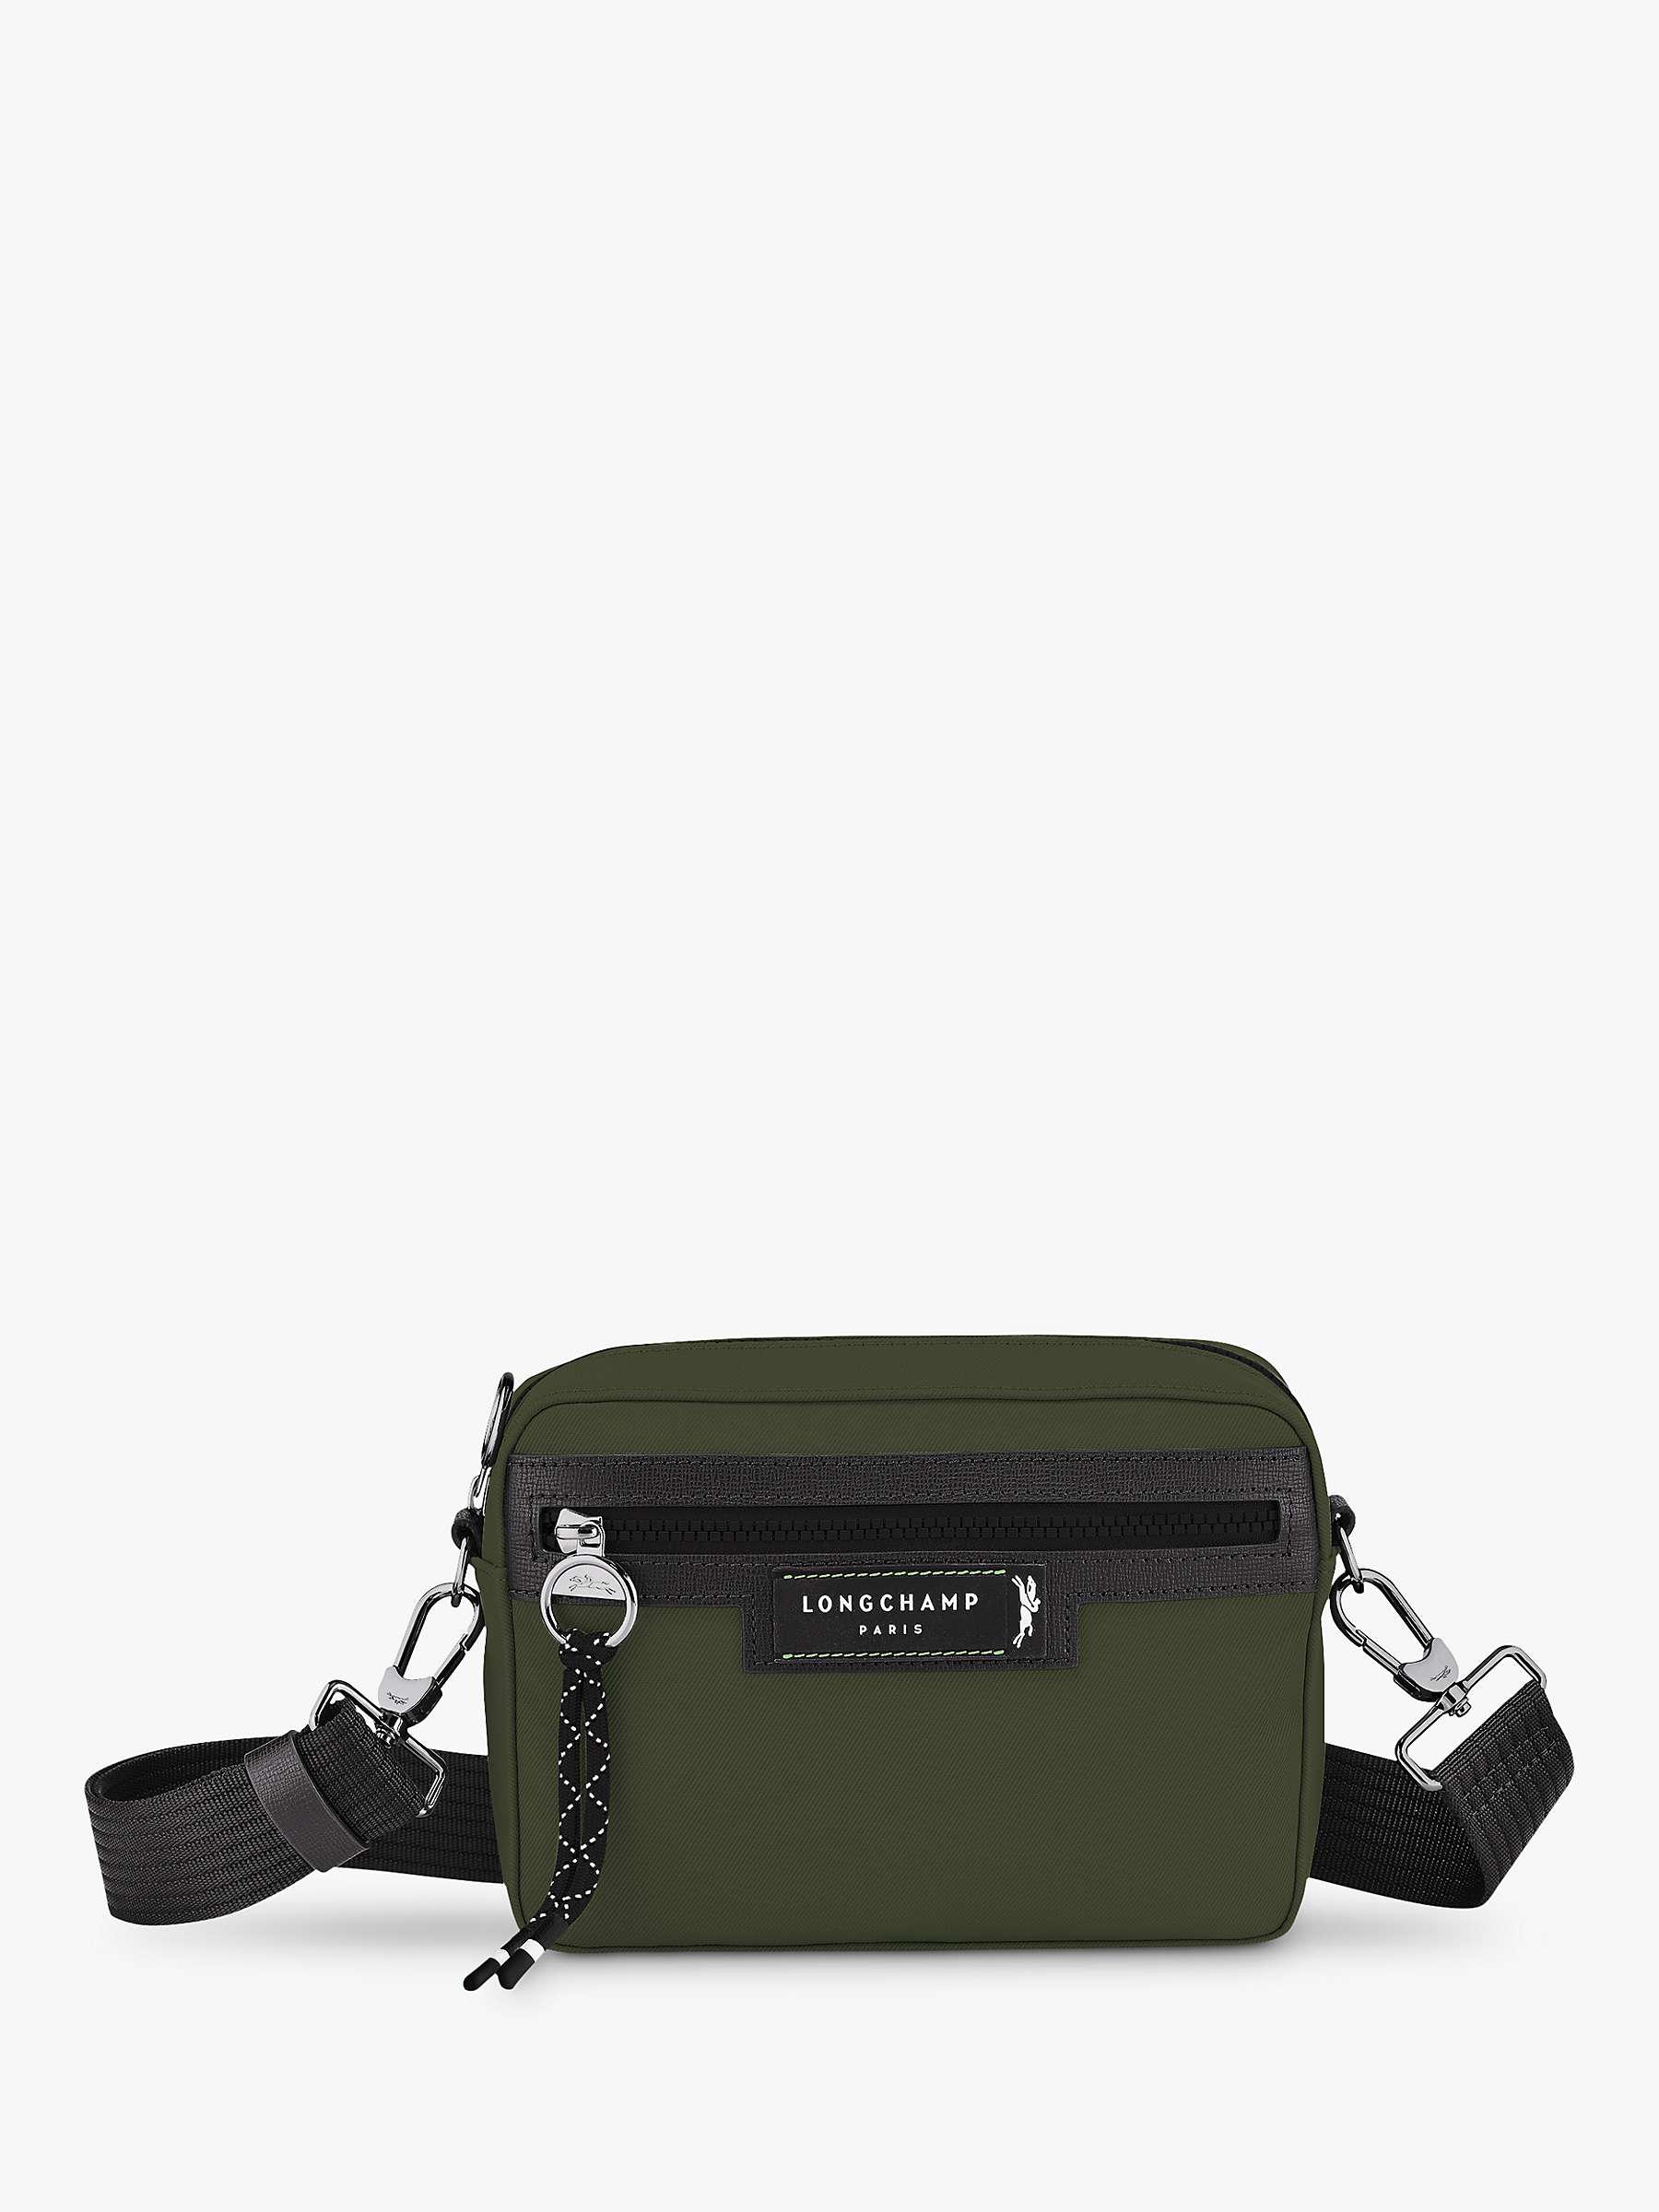 Buy Longchamp Le Pliage Energy Recycled Camera Bag Online at johnlewis.com